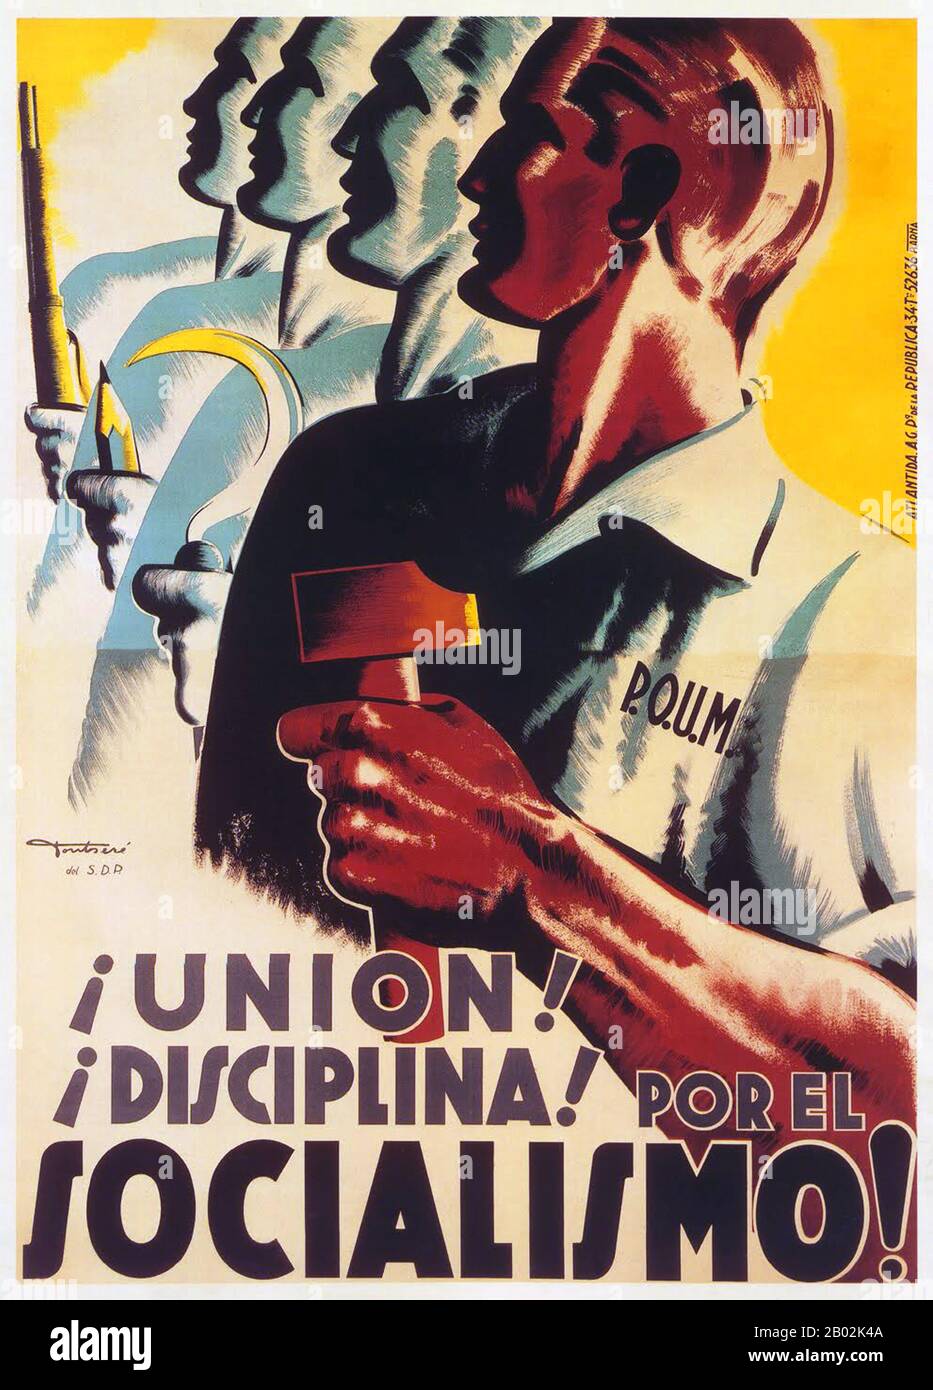 The Workers' Party of Marxist Unification (Spanish: Partido Obrero de Unificación Marxista, POUM; Catalan: Partit Obrer d'Unificació Marxista) was a Spanish communist political party formed during the Second Republic and mainly active around the Spanish Civil War.  It was formed by the fusion of the Trotskyist Communist Left of Spain (Izquierda Comunista de España, ICE) and the Workers and Peasants' Bloc (BOC, affiliated with the Right Opposition) against the will of Leon Trotsky, with whom the former broke.  The writer George Orwell served with the party and witnessed the Stalinist repression Stock Photo